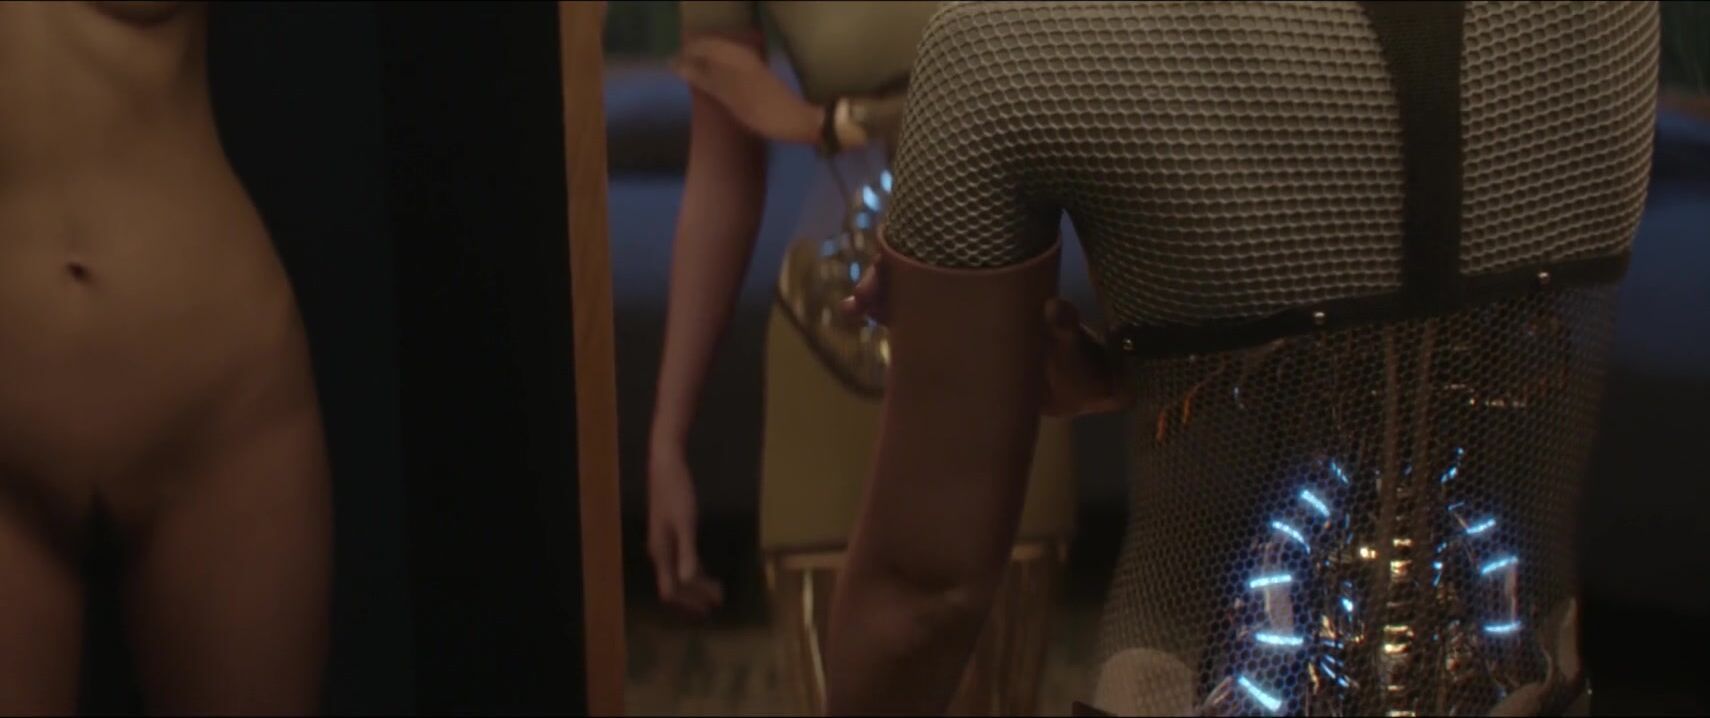 Gay Handjob Naked Alicia Vikander loves being sexy in feature film moment from Ex Machina (2015) Asian Babes